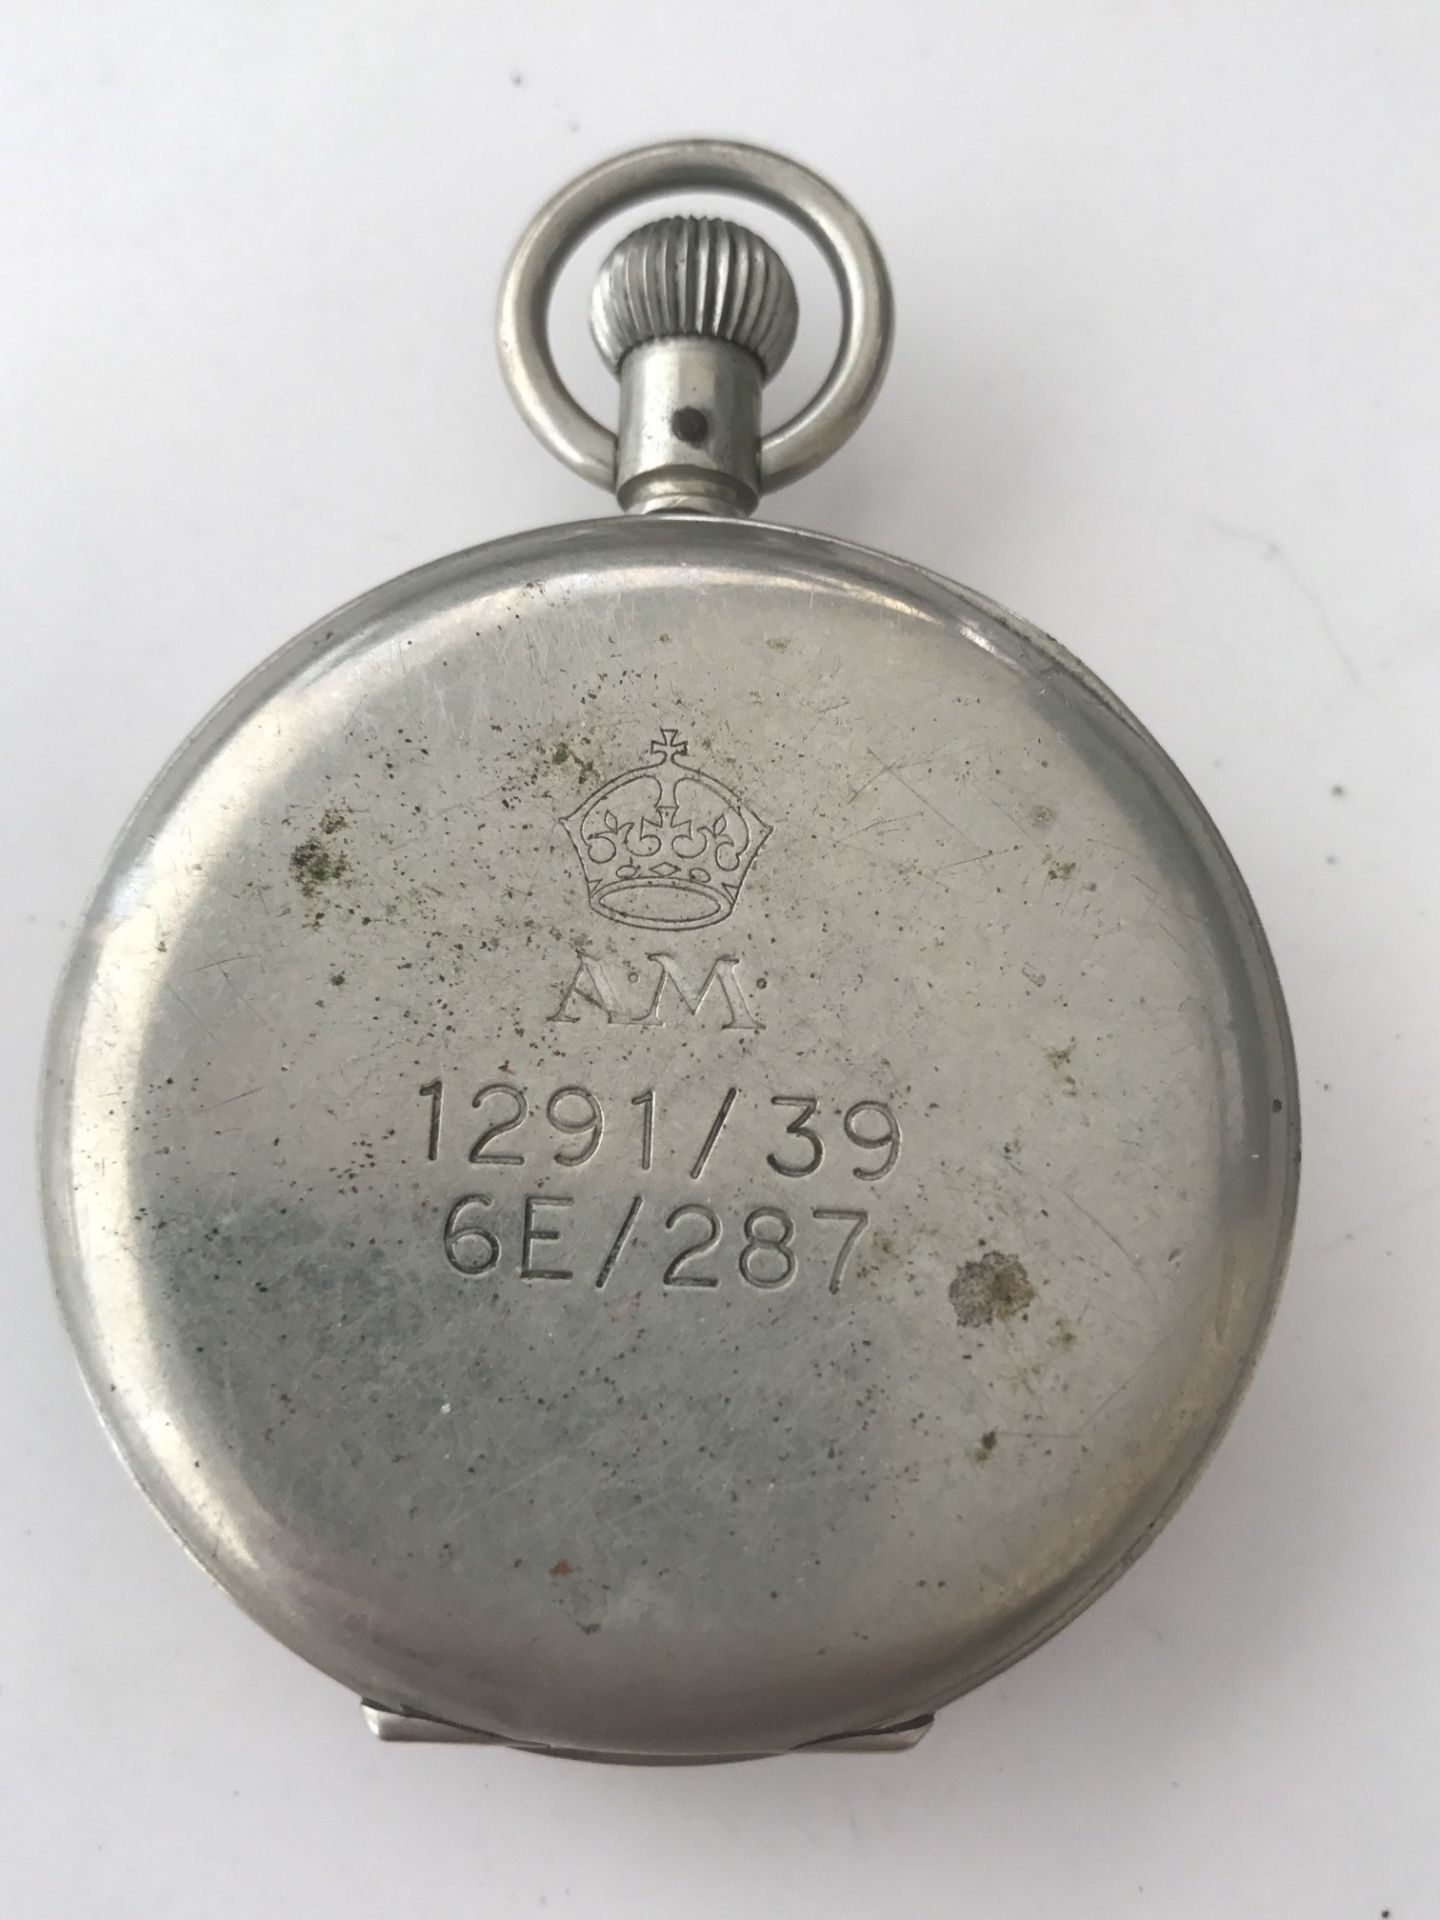 AIR MUISTLEY 1291/39 STOPWATCH - Image 2 of 3